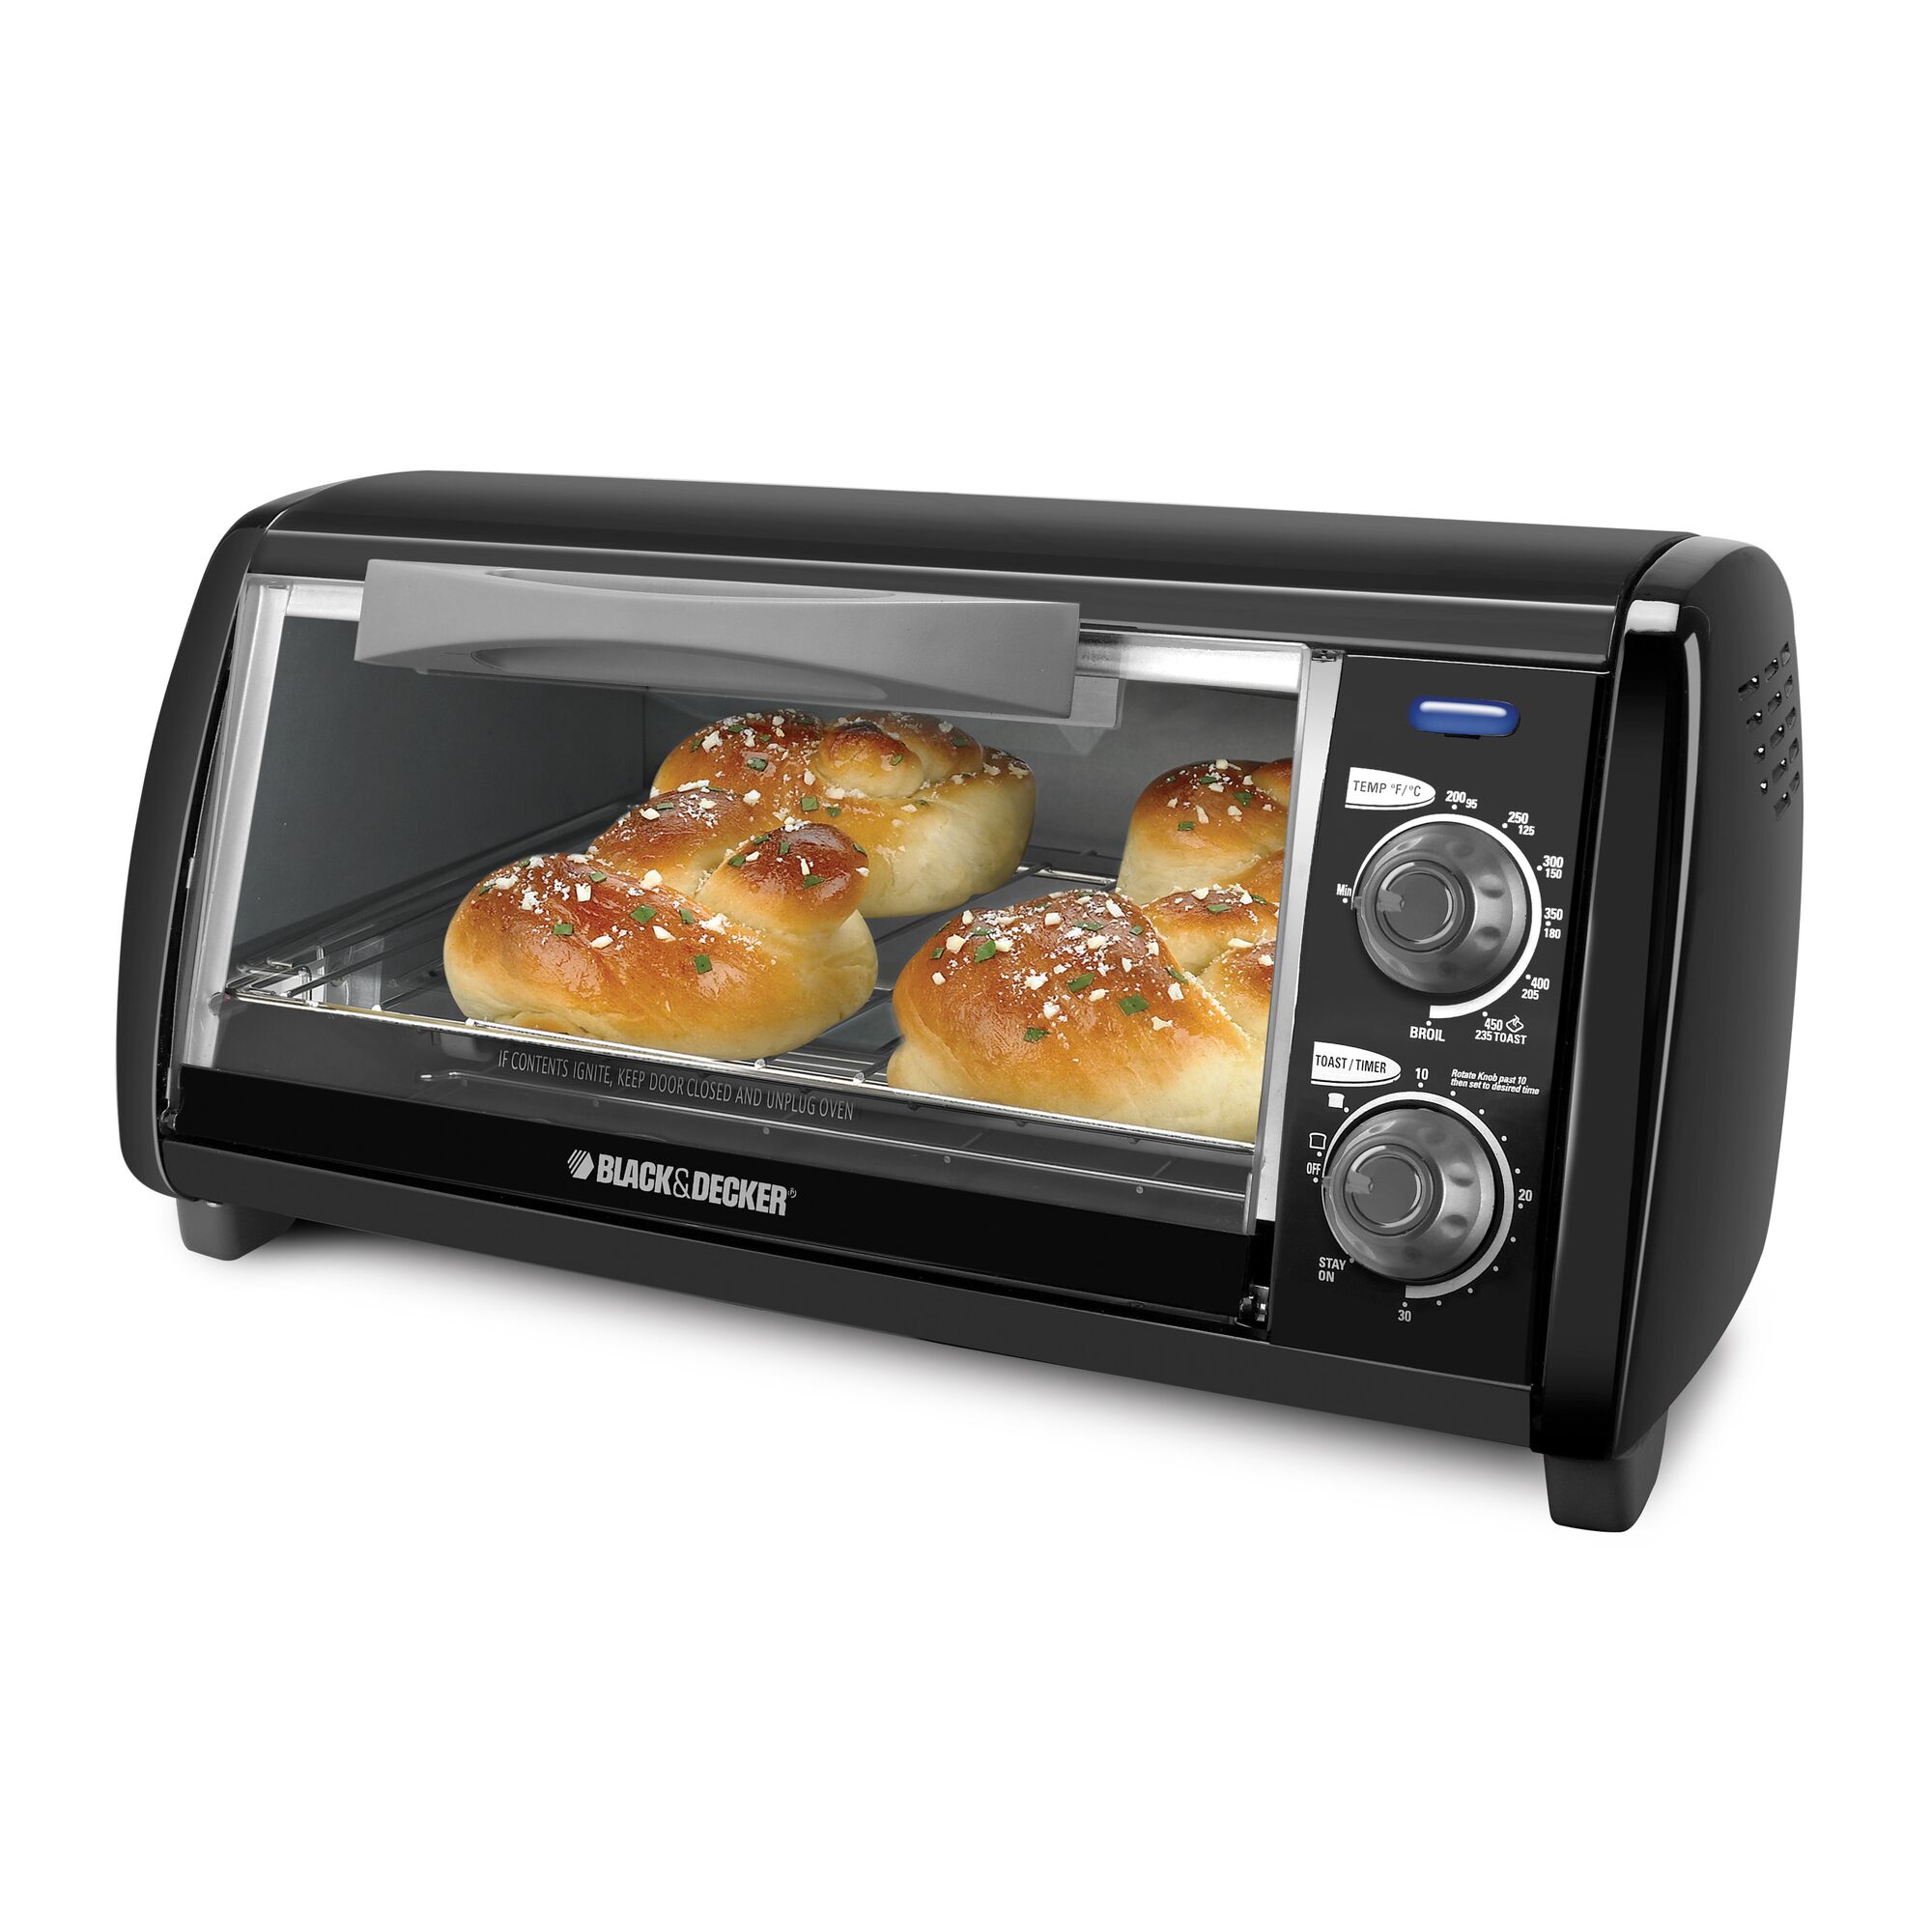 Countertop toaster oven.